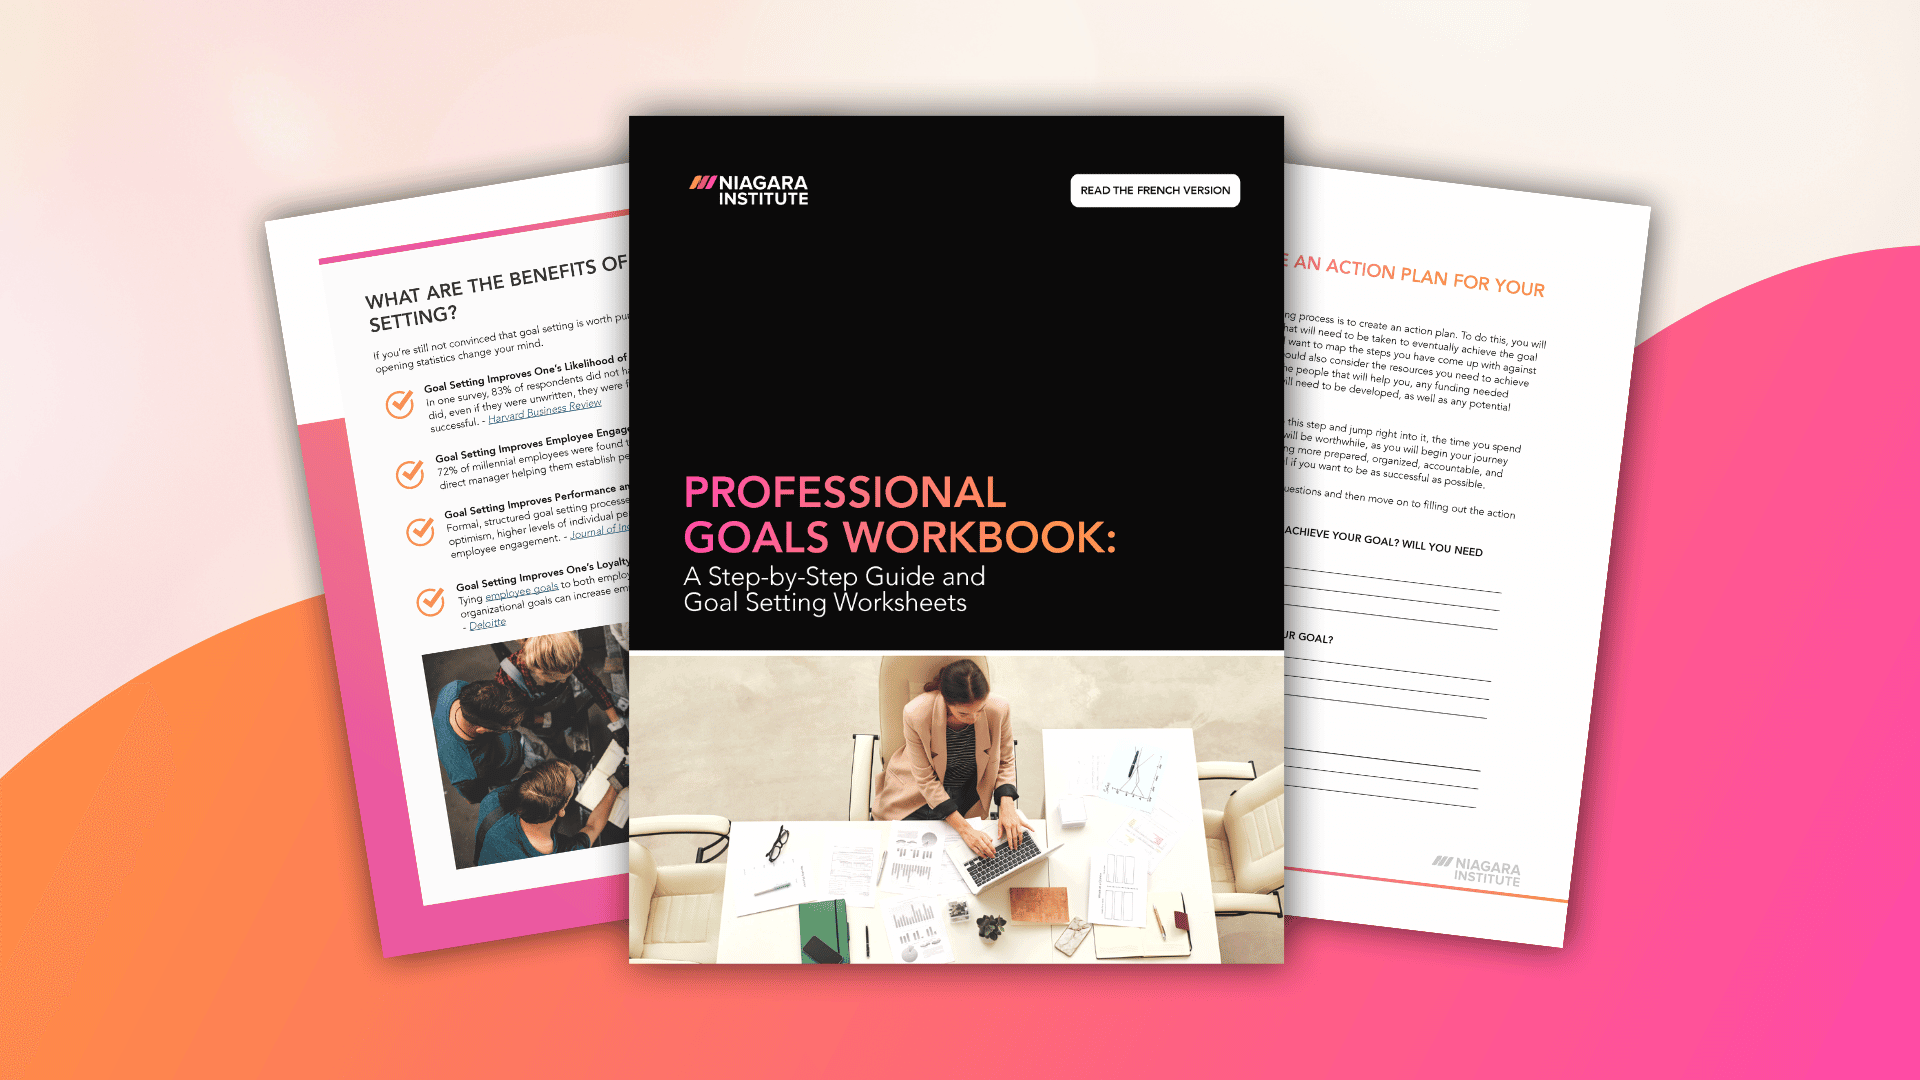 [GUIDE] The Professional Goals Workbook